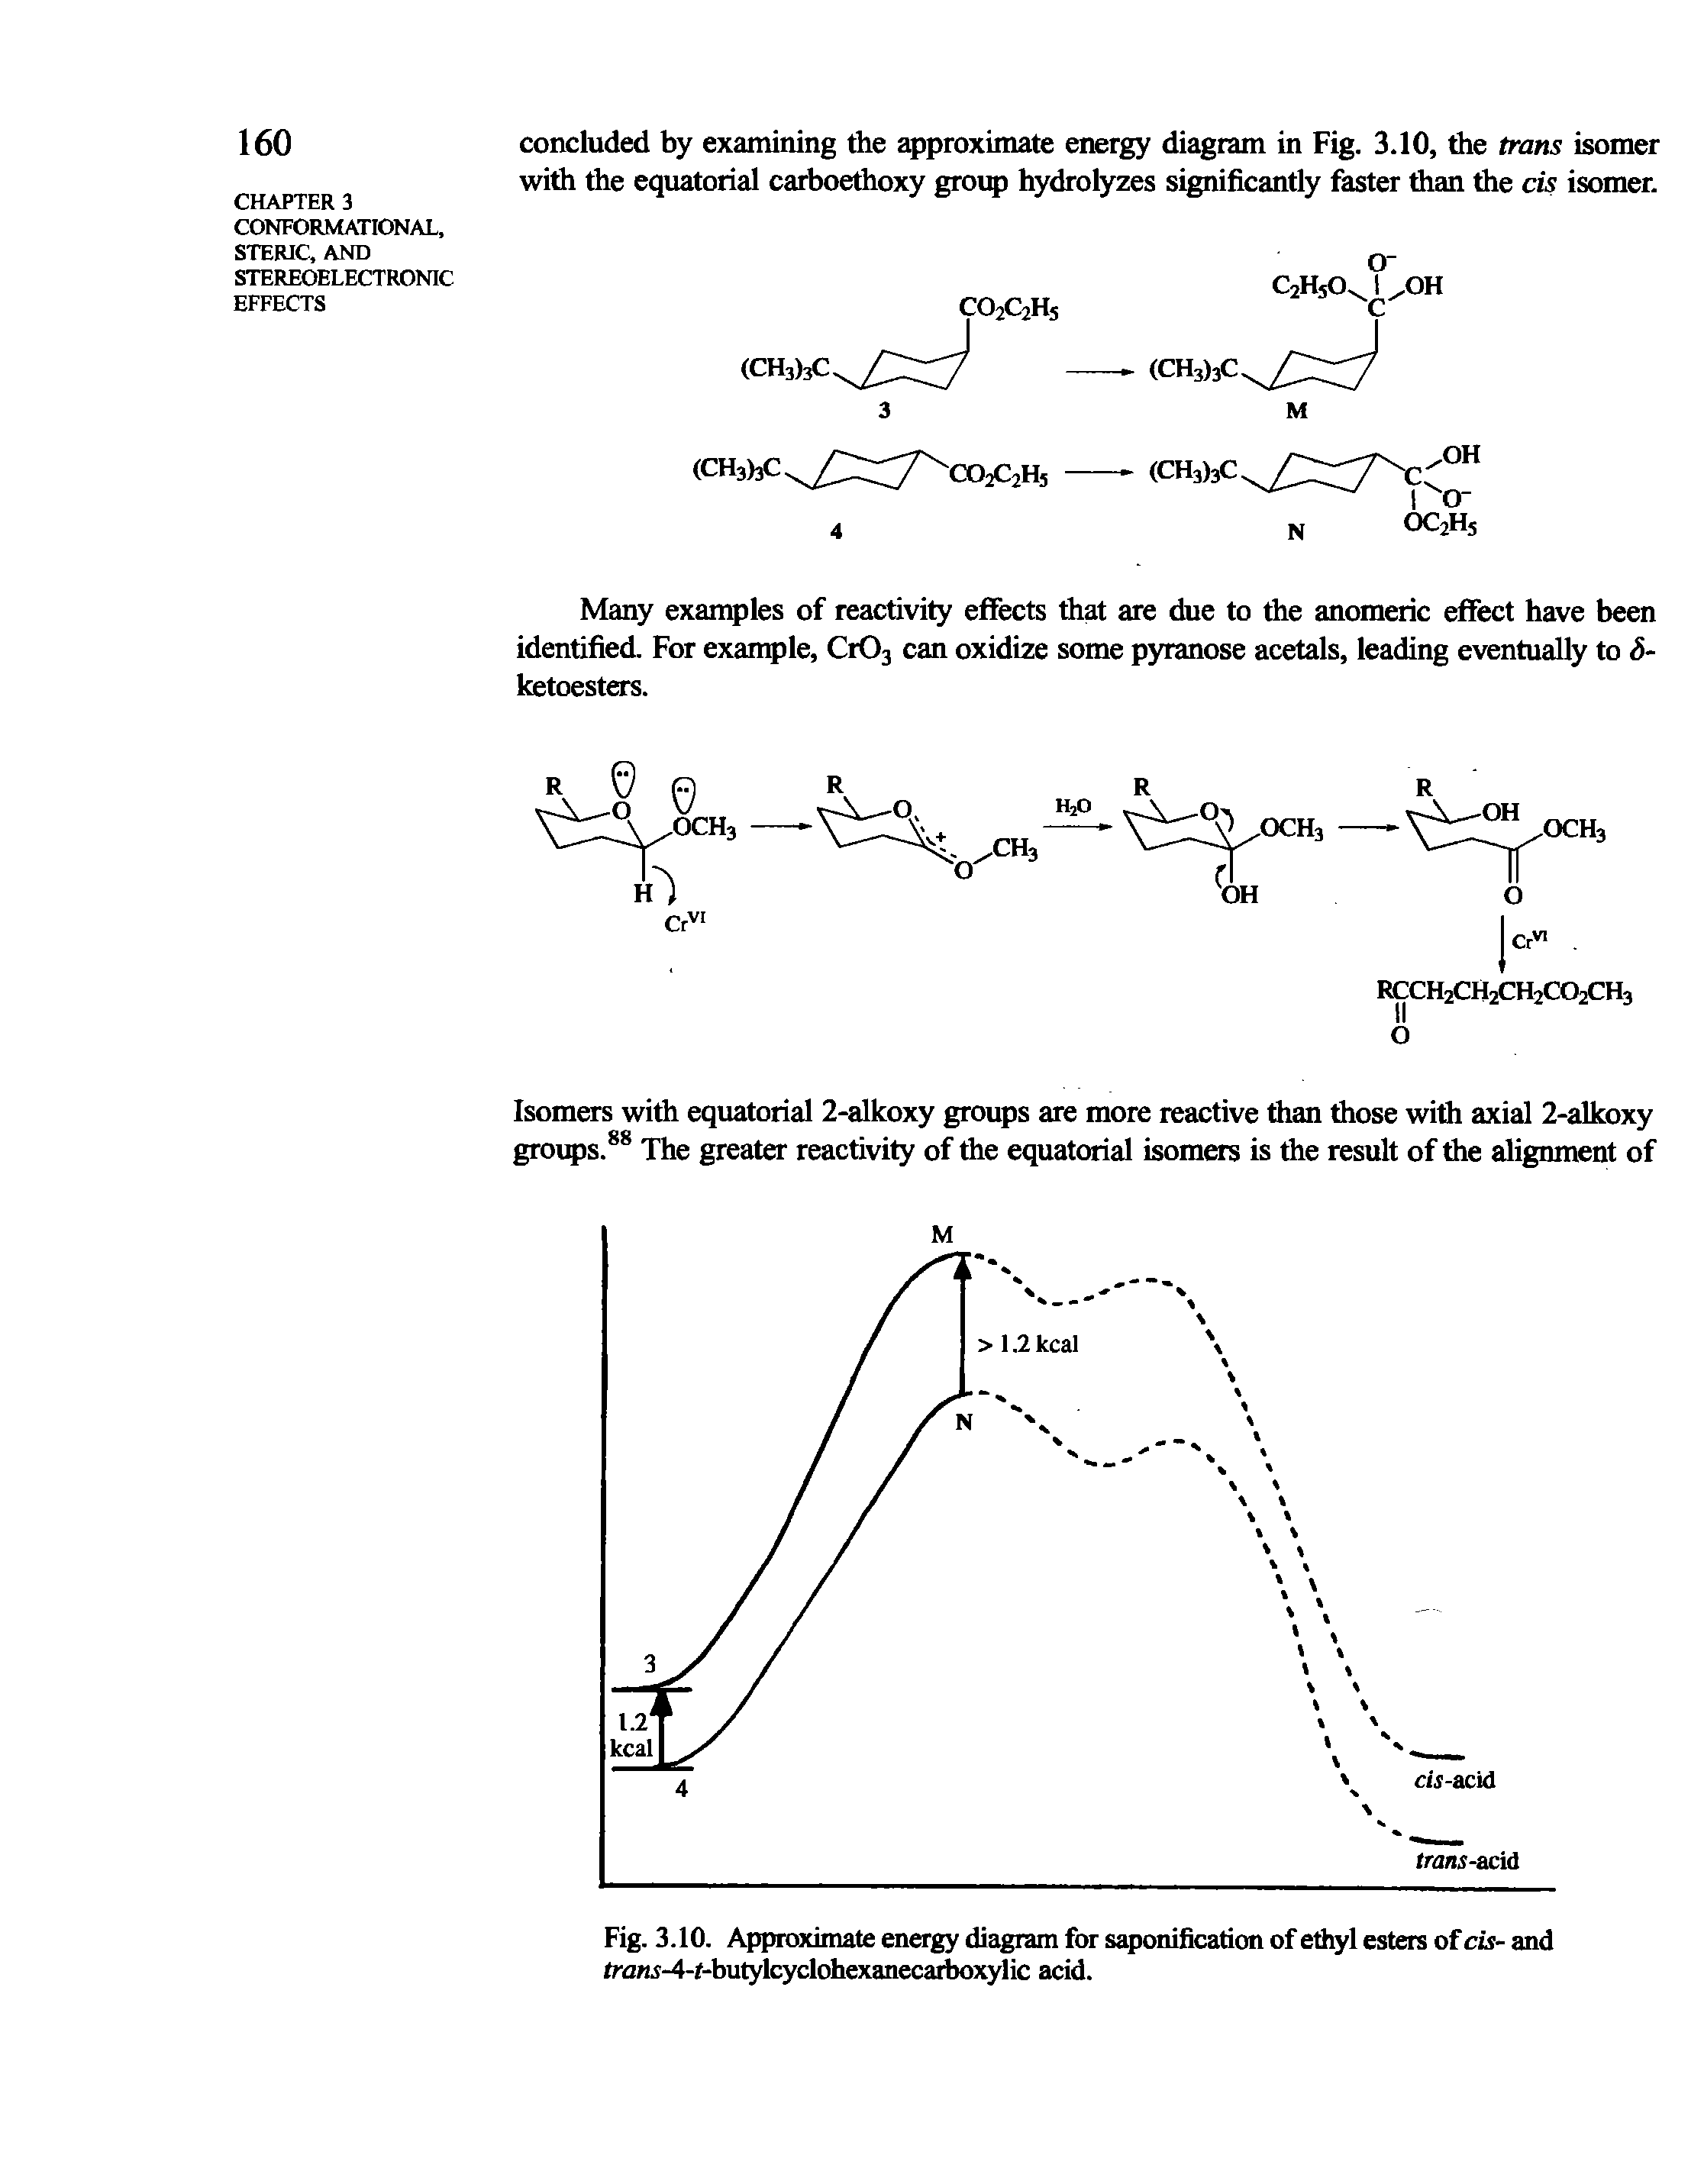 Fig. 3.10. Approximate energy diagram for saponification of ethyl esters of cis- and traKi-4-r-butylcyclohexanecaiboxylic acid.